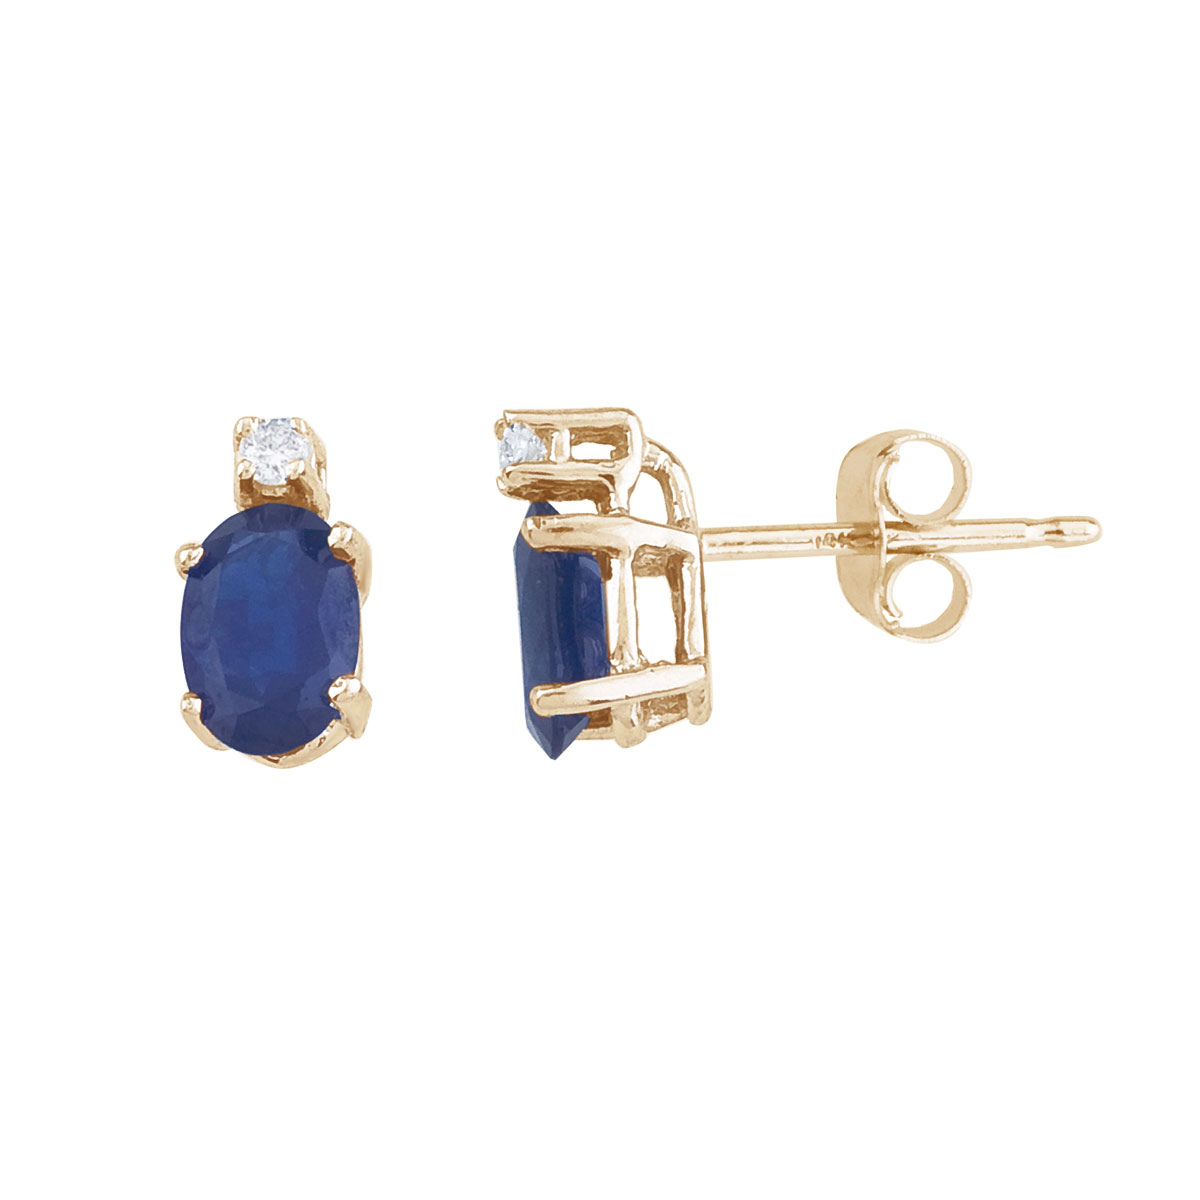 These 6x4 mm oval sapphire earrings are set in beautiful 14k yellow gold and feature .04 total ca...